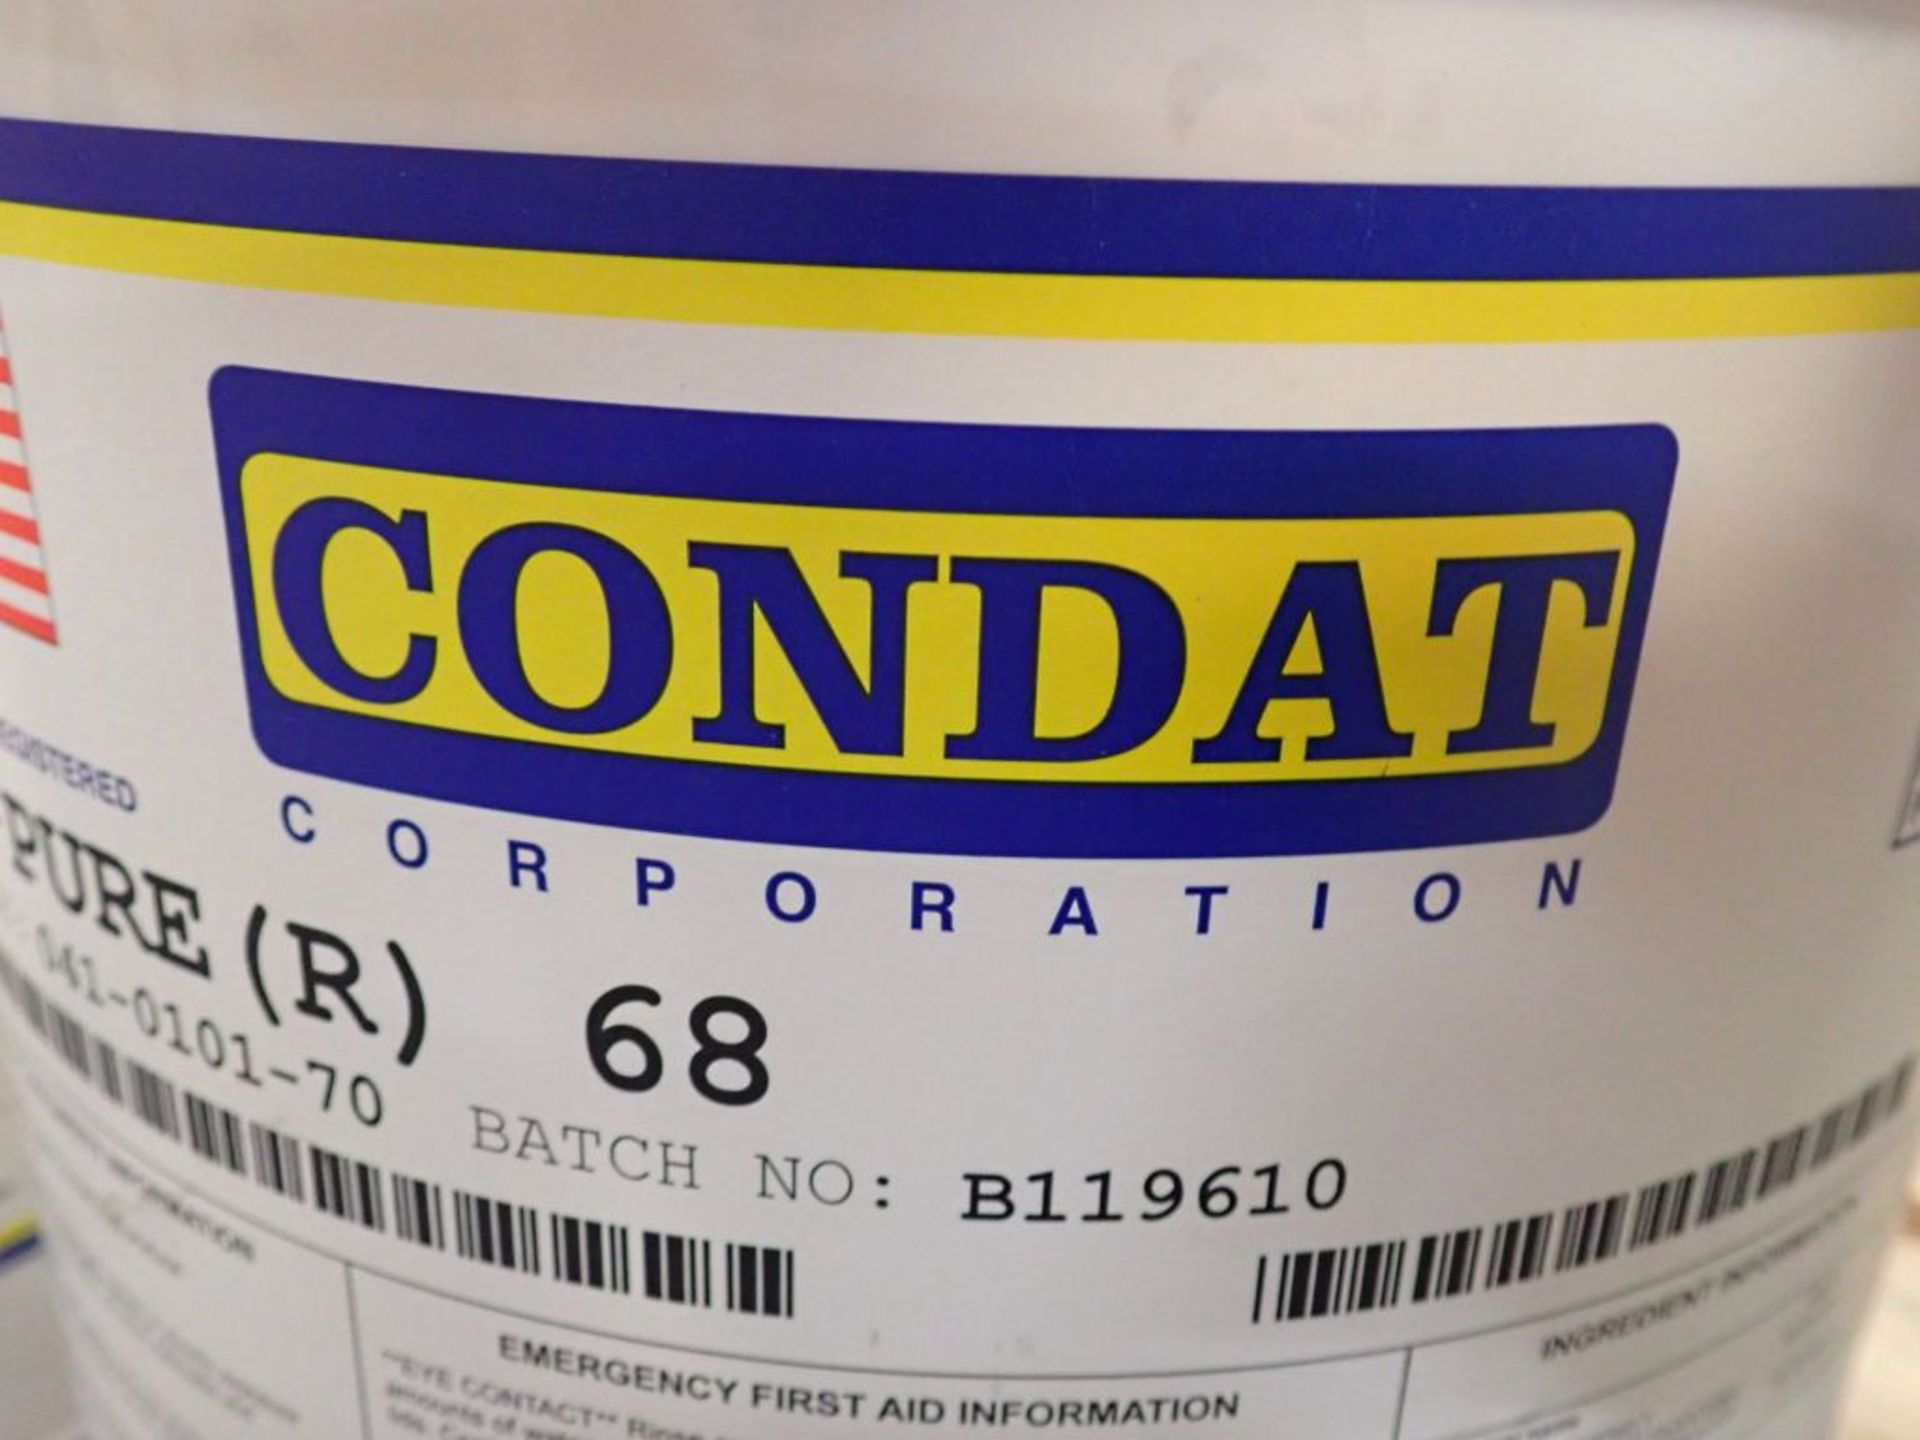 Lot of (4) Containers of 5-Gallon Condat Wire Lubricant | Item Key: 041-0191-70; New Surplus - Image 12 of 12